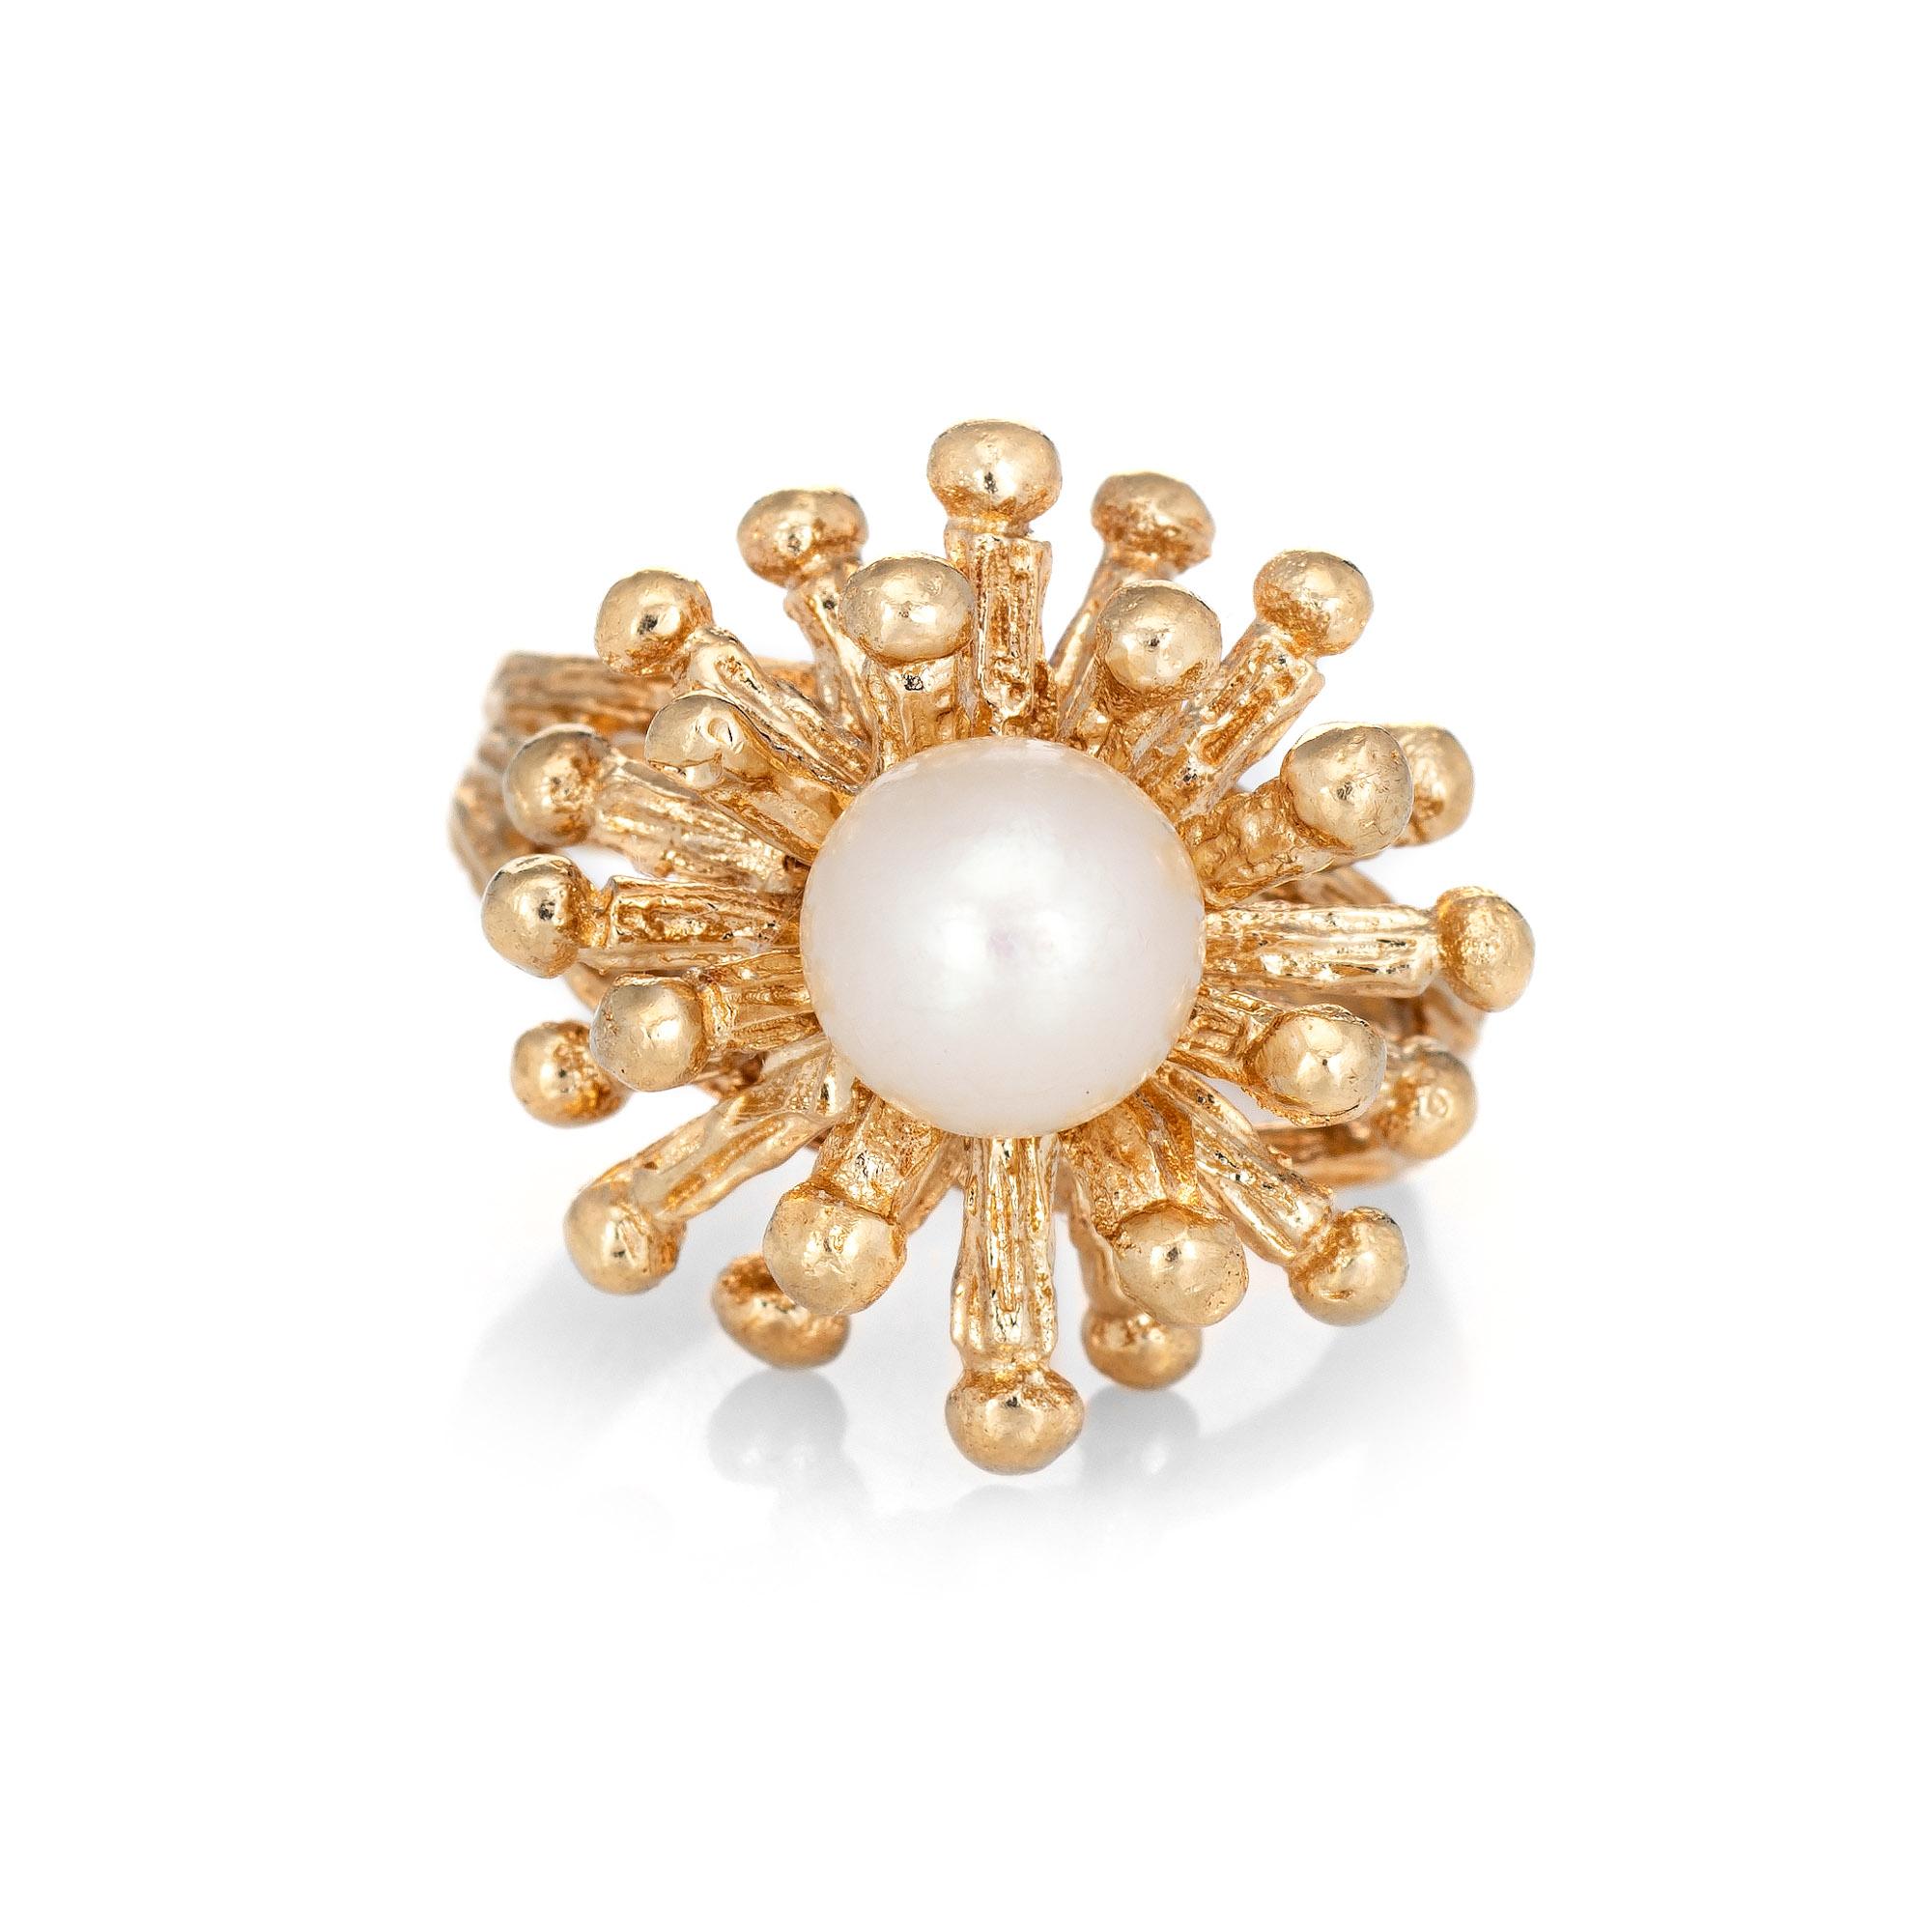 Stylish vintage cultured pearl Sputnik ring (circa 1960s to 1970s) crafted in 14 karat yellow gold. 

Cultured pearl measures 7mm (in excellent condition and free of cracks or chips). 

The cultured pearl is perched in the distinct Sputnik mount.